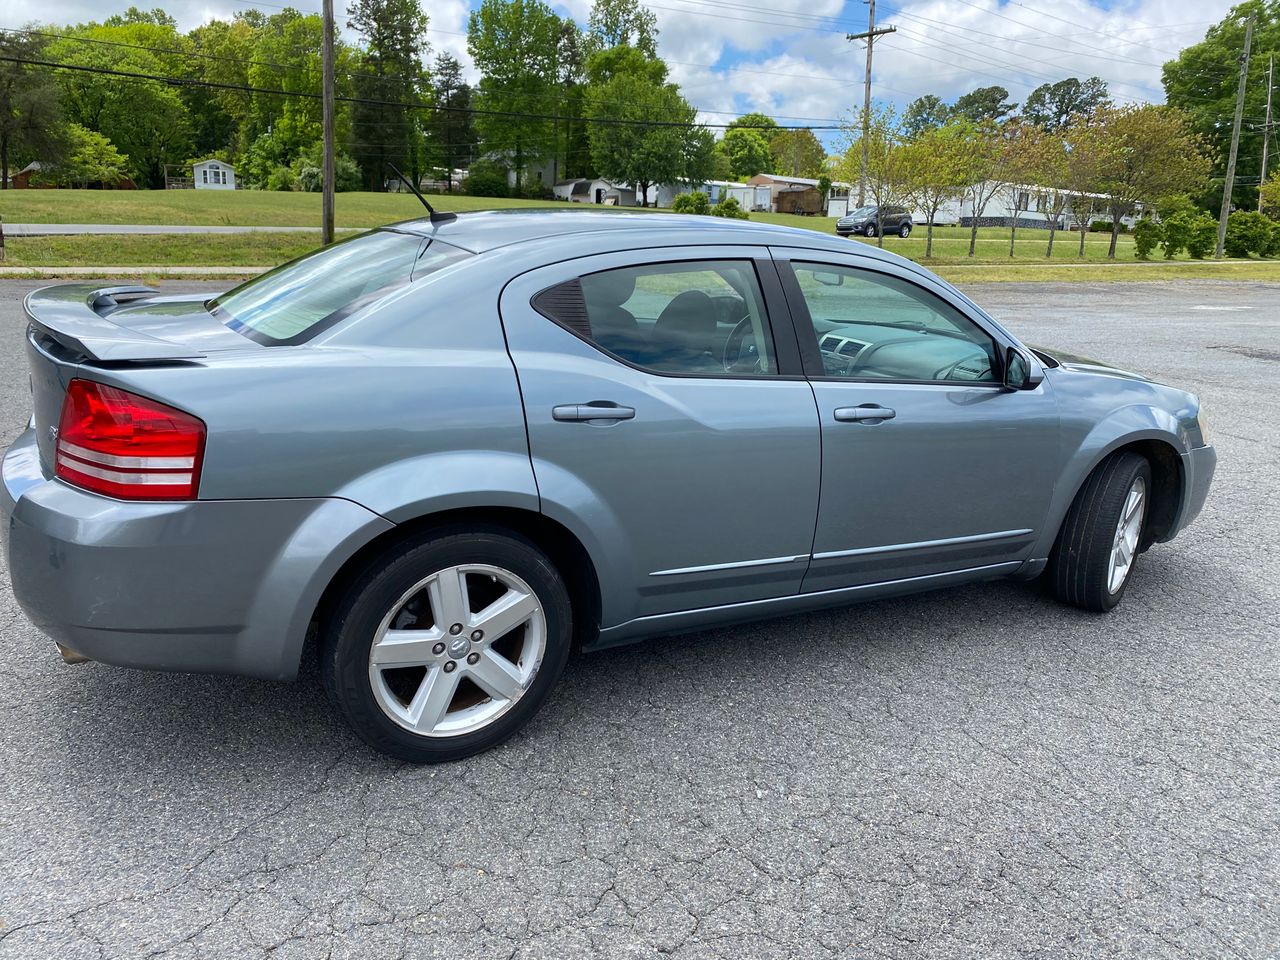 2008 Dodge Avenger R/T | Concord, NC, Bright Silver Metallic Clearcoat (Silver), All Wheel